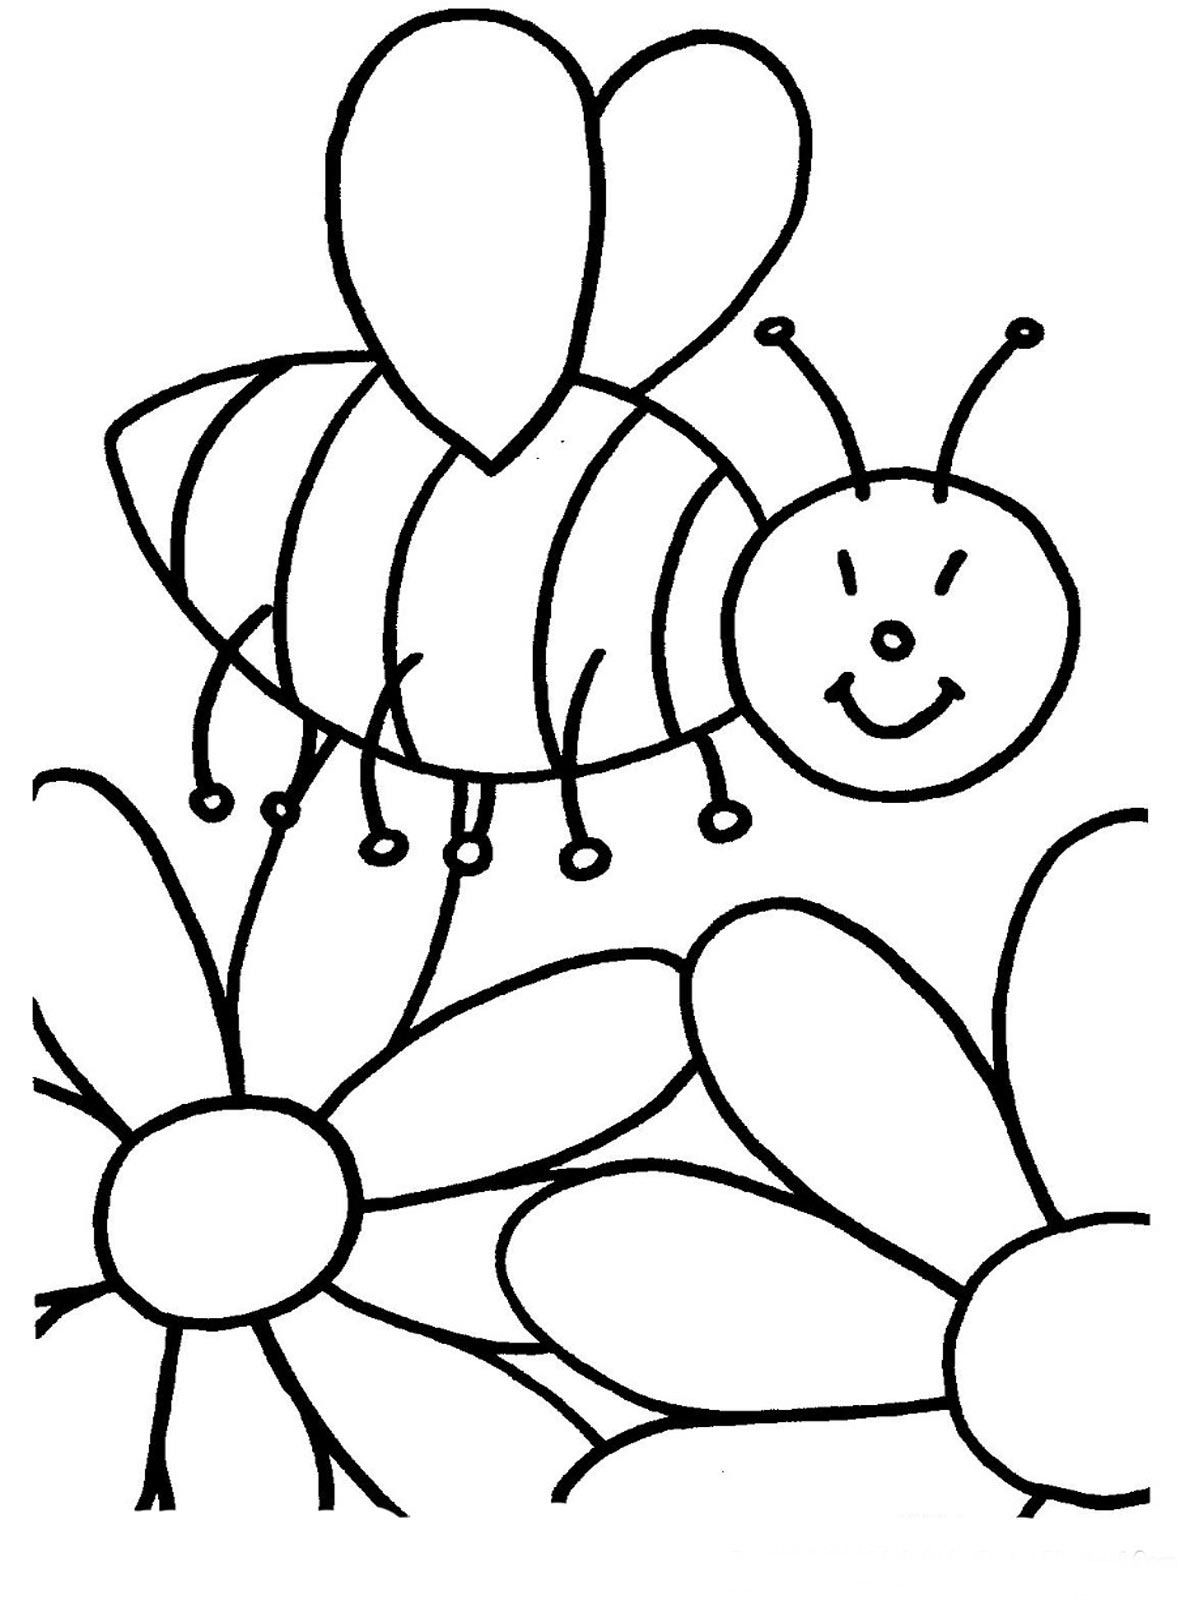 Bees Coloring Pages Realistic | Realistic Coloring Pages